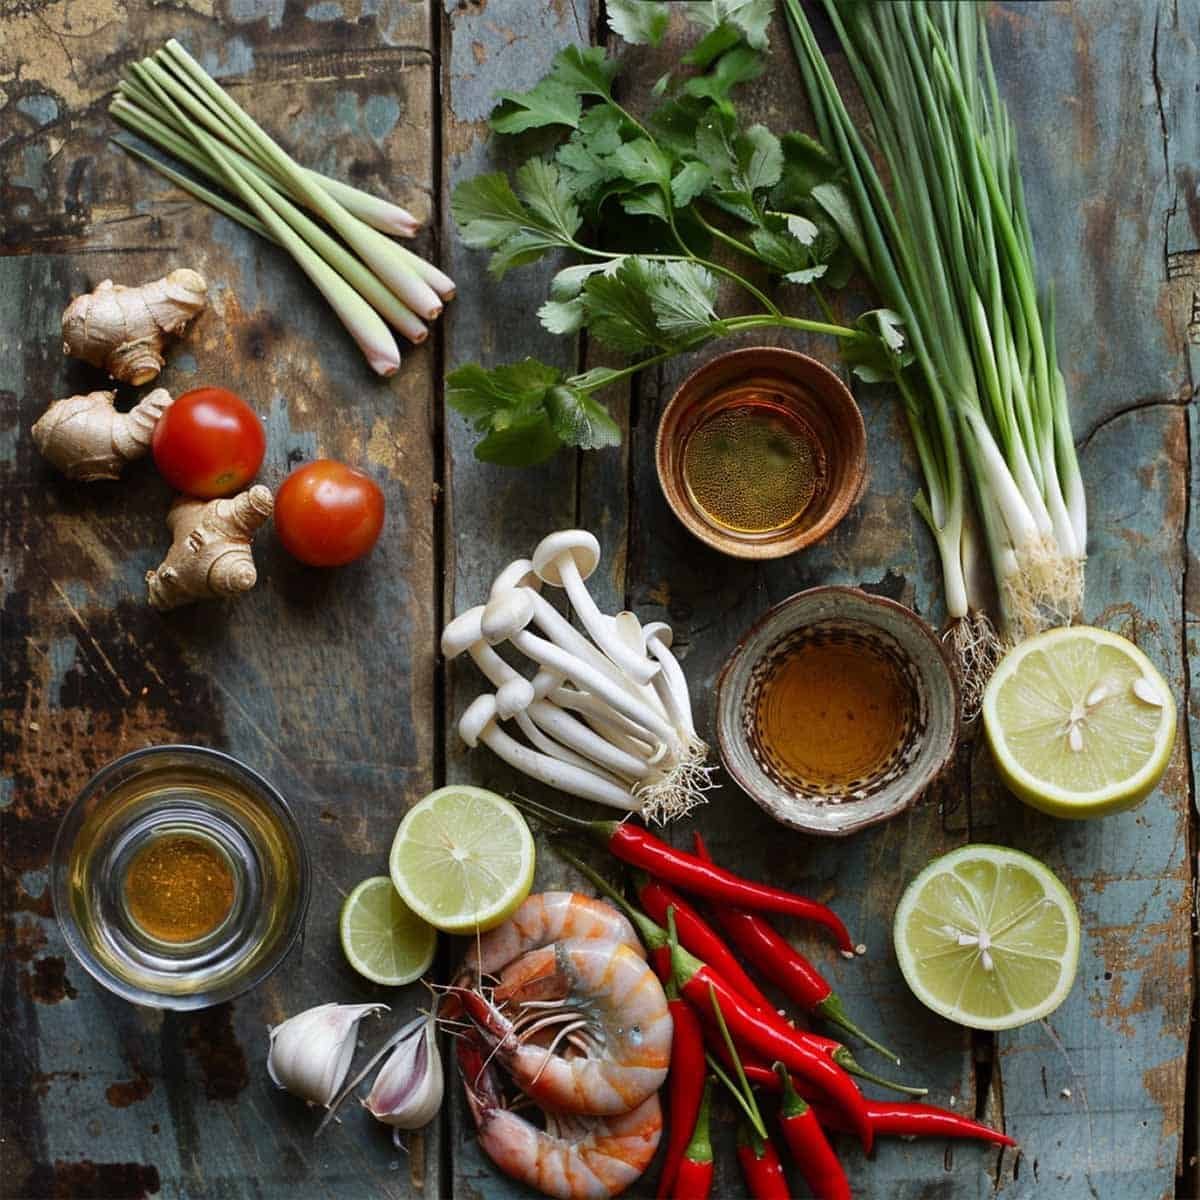 ingredients for Thai hot and sour shrimp soup Tom Yum Goong includingshrimp, lemongrass, lime leaves, ginger, fish sauce, lime juice, Thai bird chilies, mushrooms, cherry tomatoes, and chili paste on a wooden table.